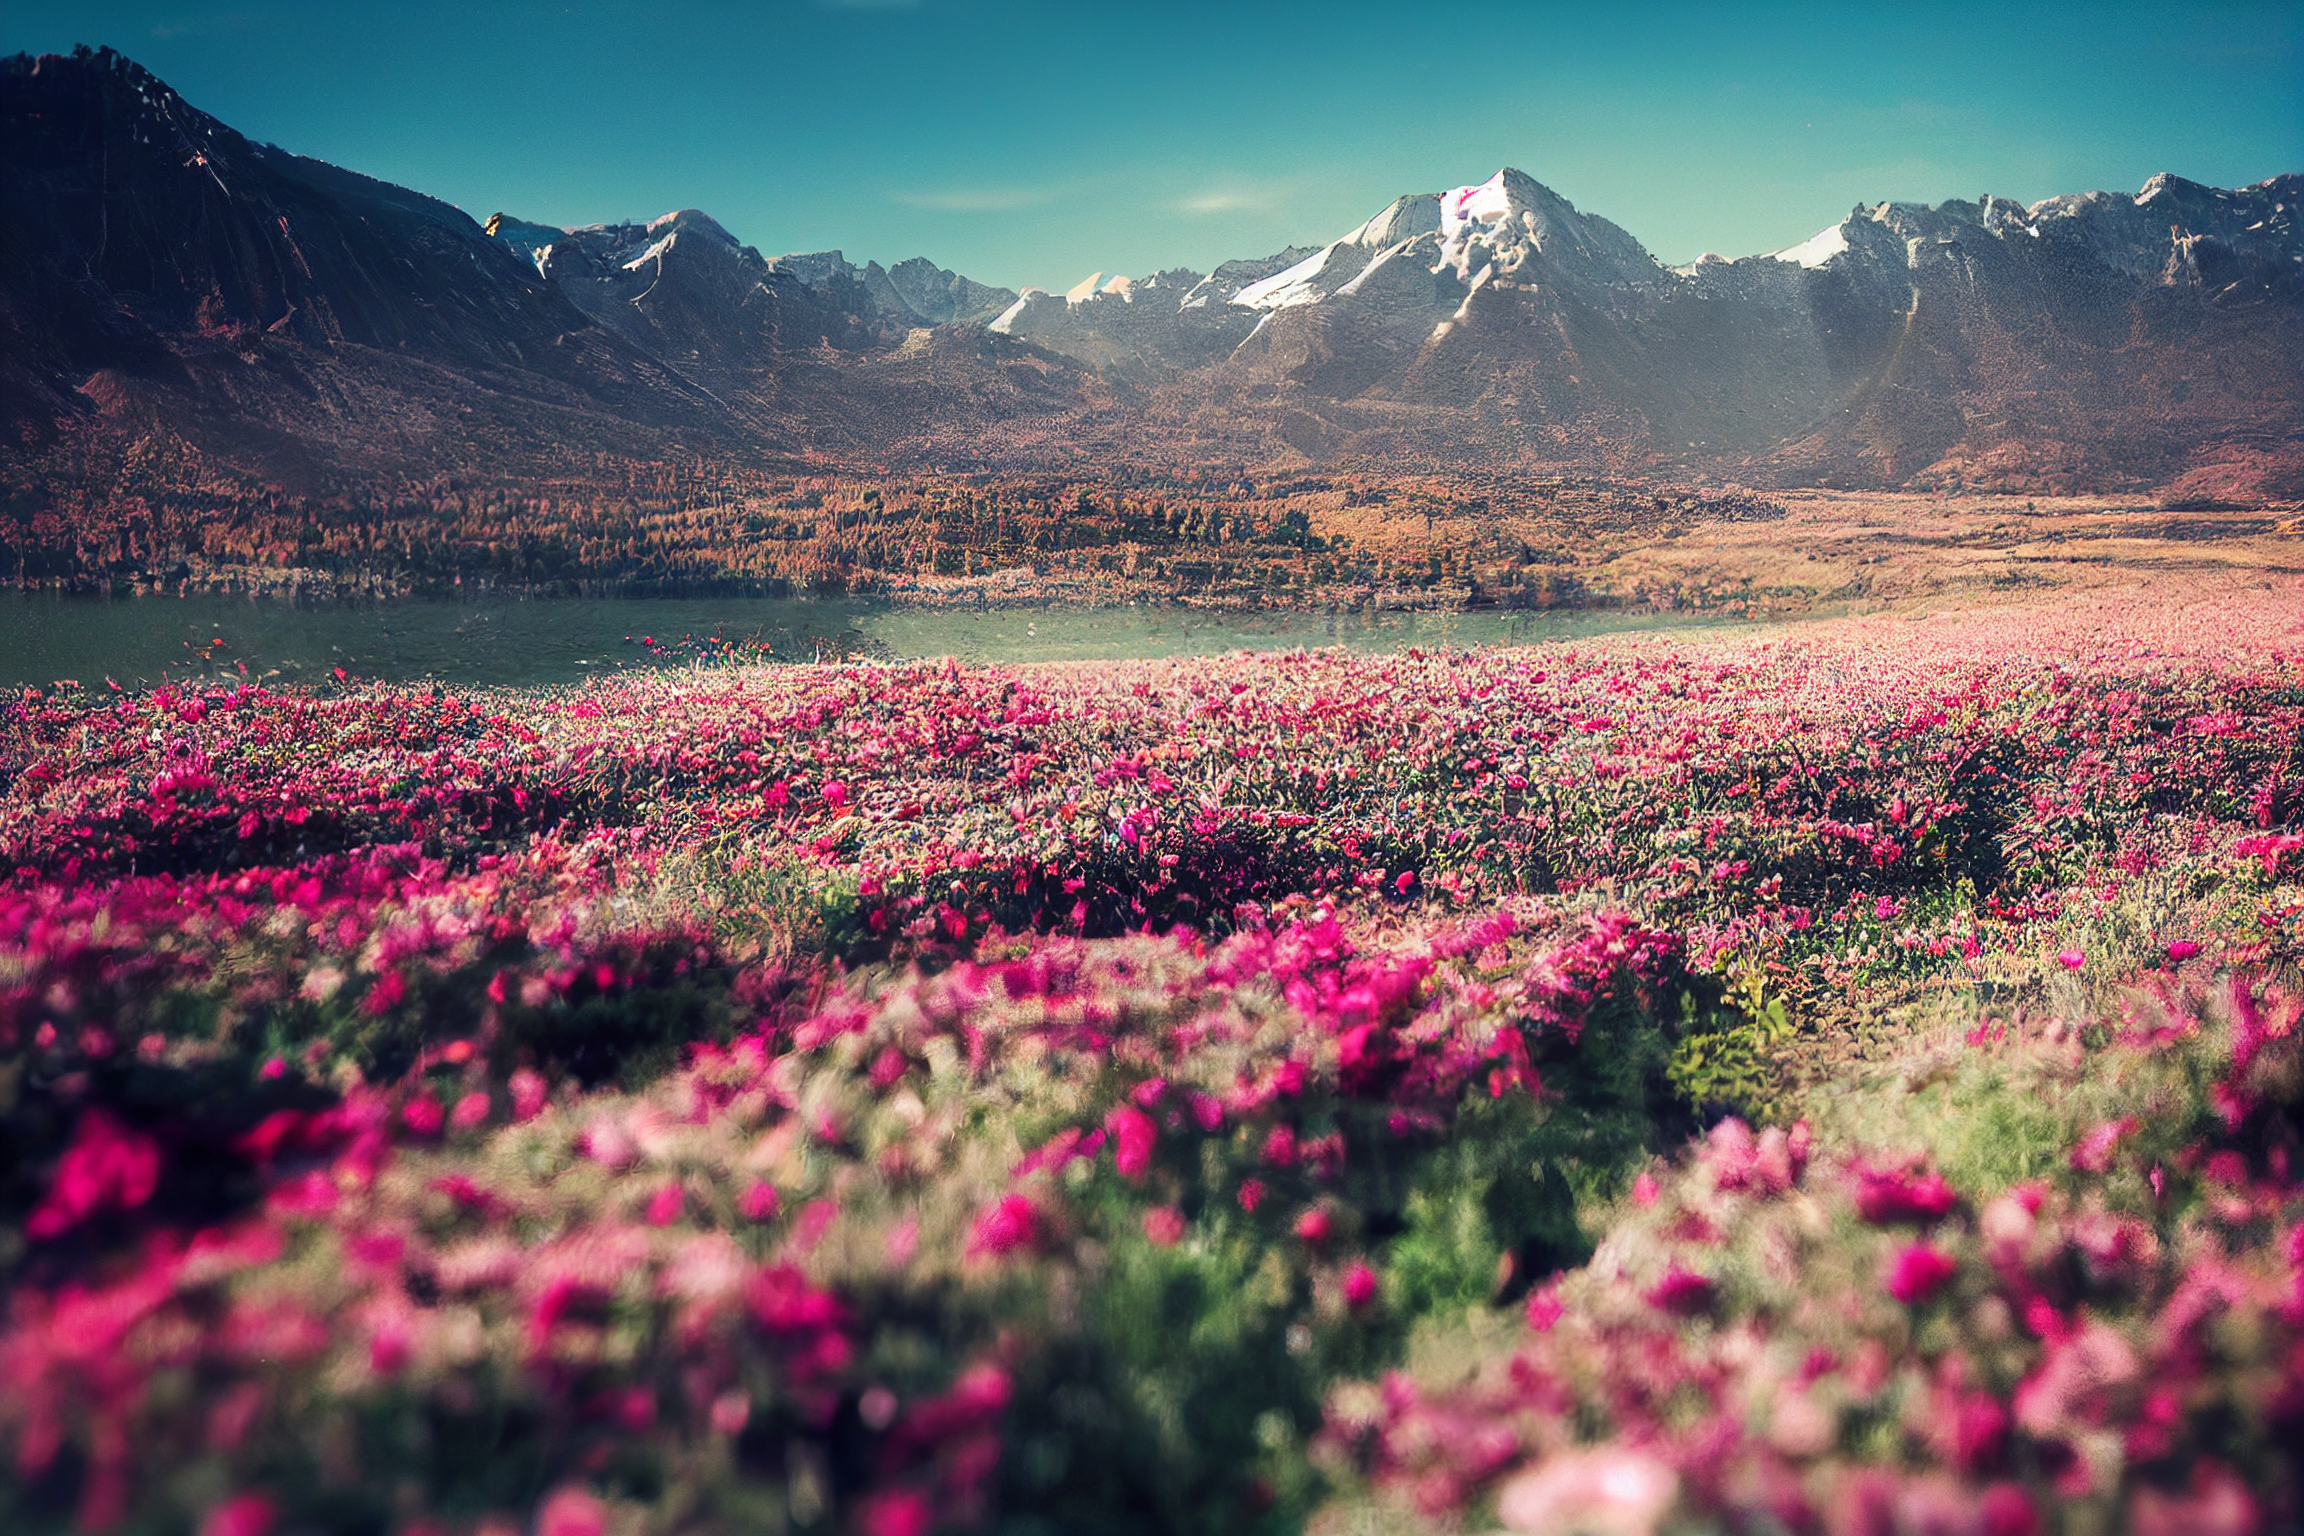 Way back a year ago – Bloomcore flowerfield in the mountains